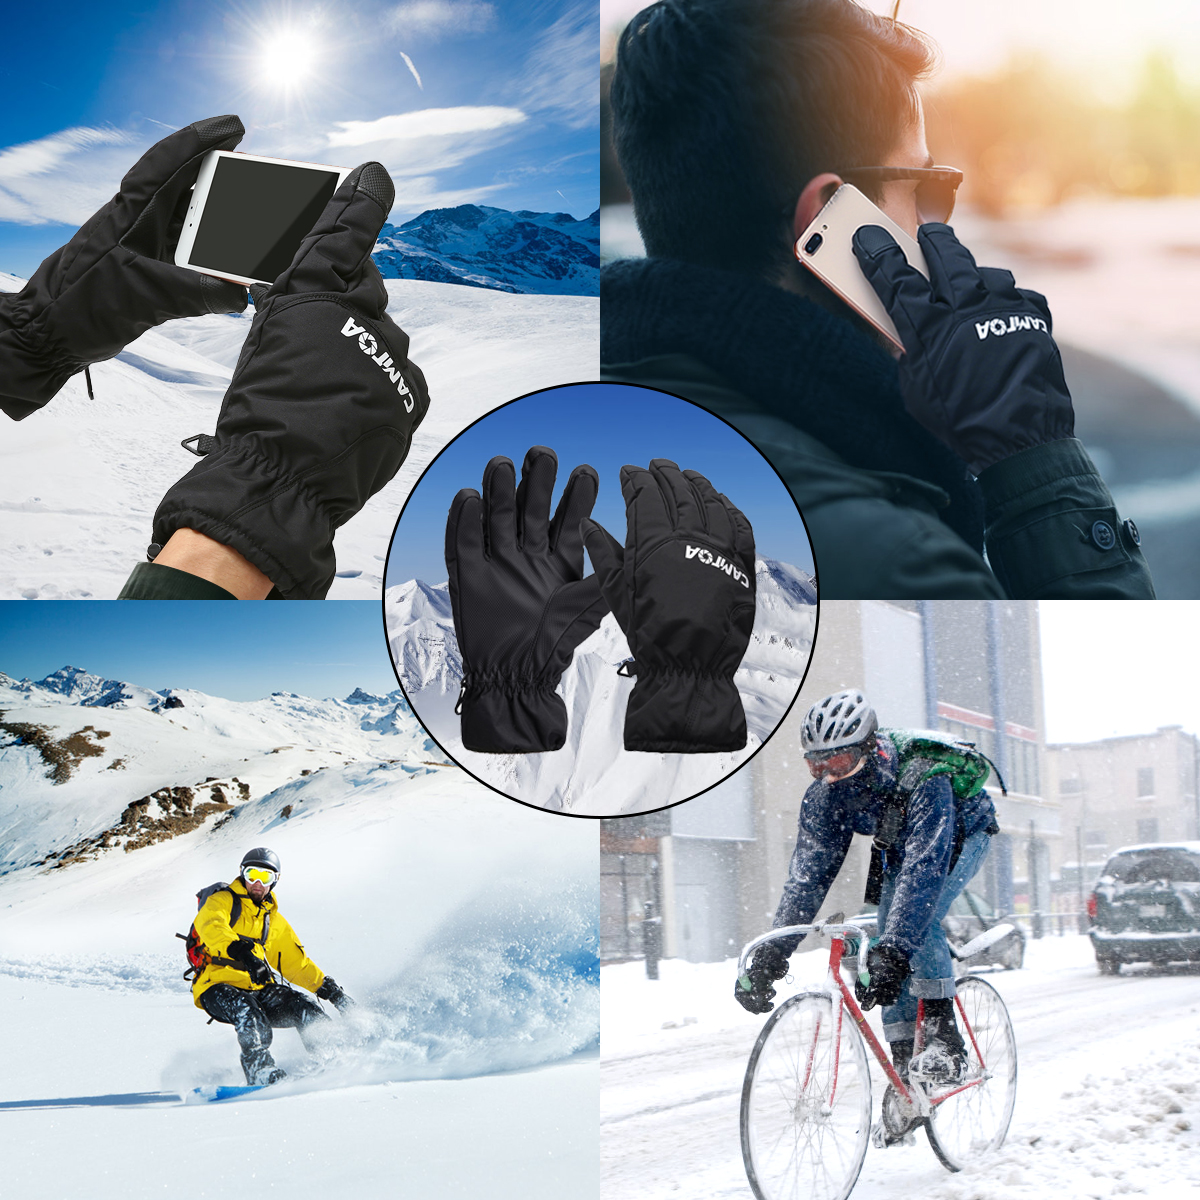 CAMTOA-Winter-Skiing-Gloves-3M-Thinsulate-Warm-Waterproof-Breathable-Snow-Gloves-for-Men-and-Women-1397724-7